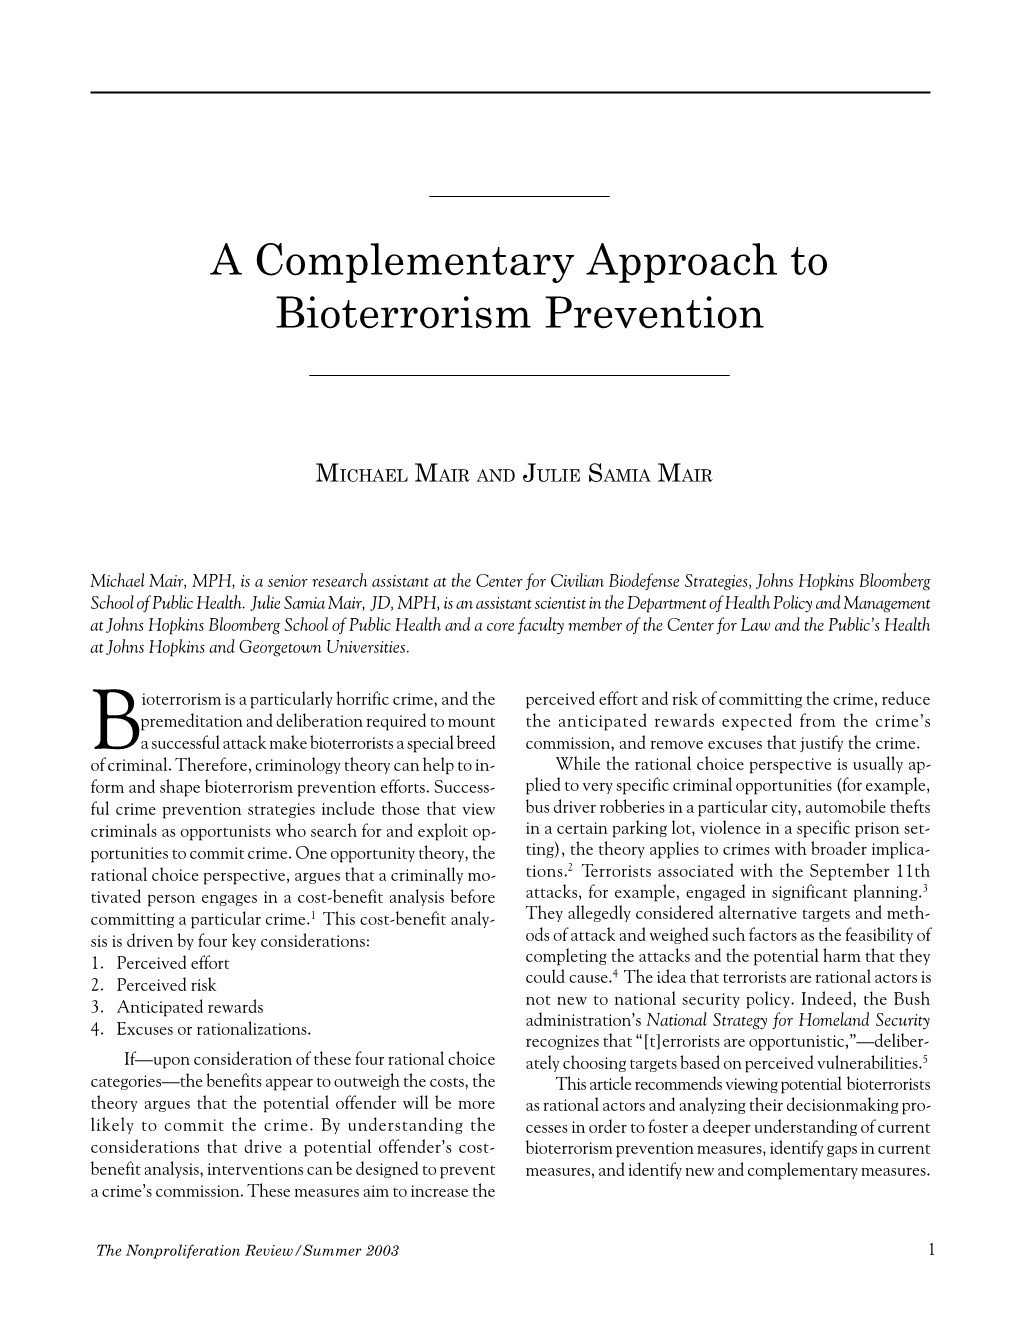 NPR10.2: a Complementary Approach to Bioterrorism Prevention